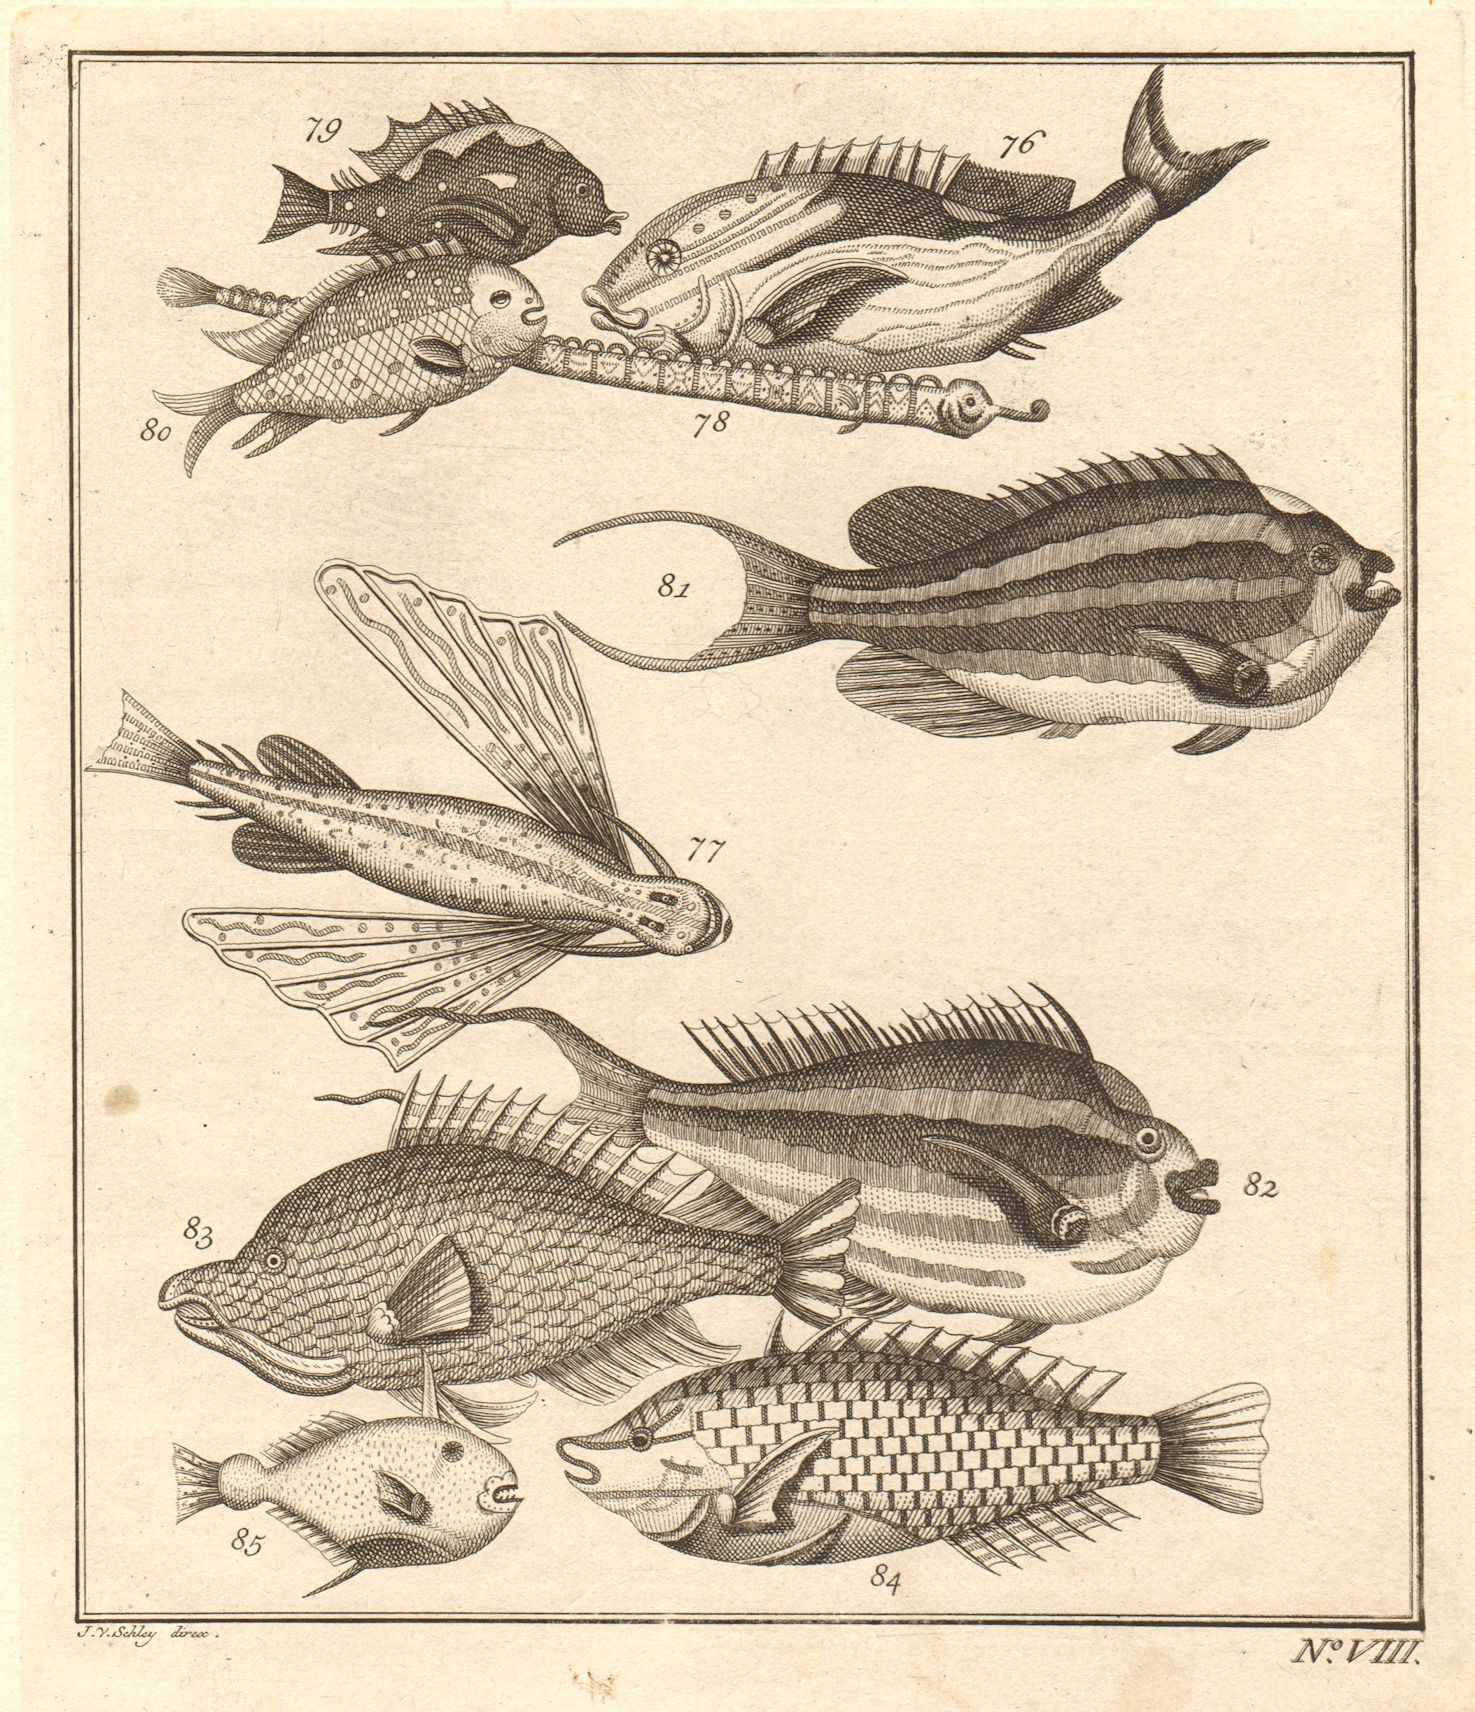 Associate Product VIII. Poissons d'Ambione. Indonesia Moluccas Maluku tropical fish. SCHLEY 1763